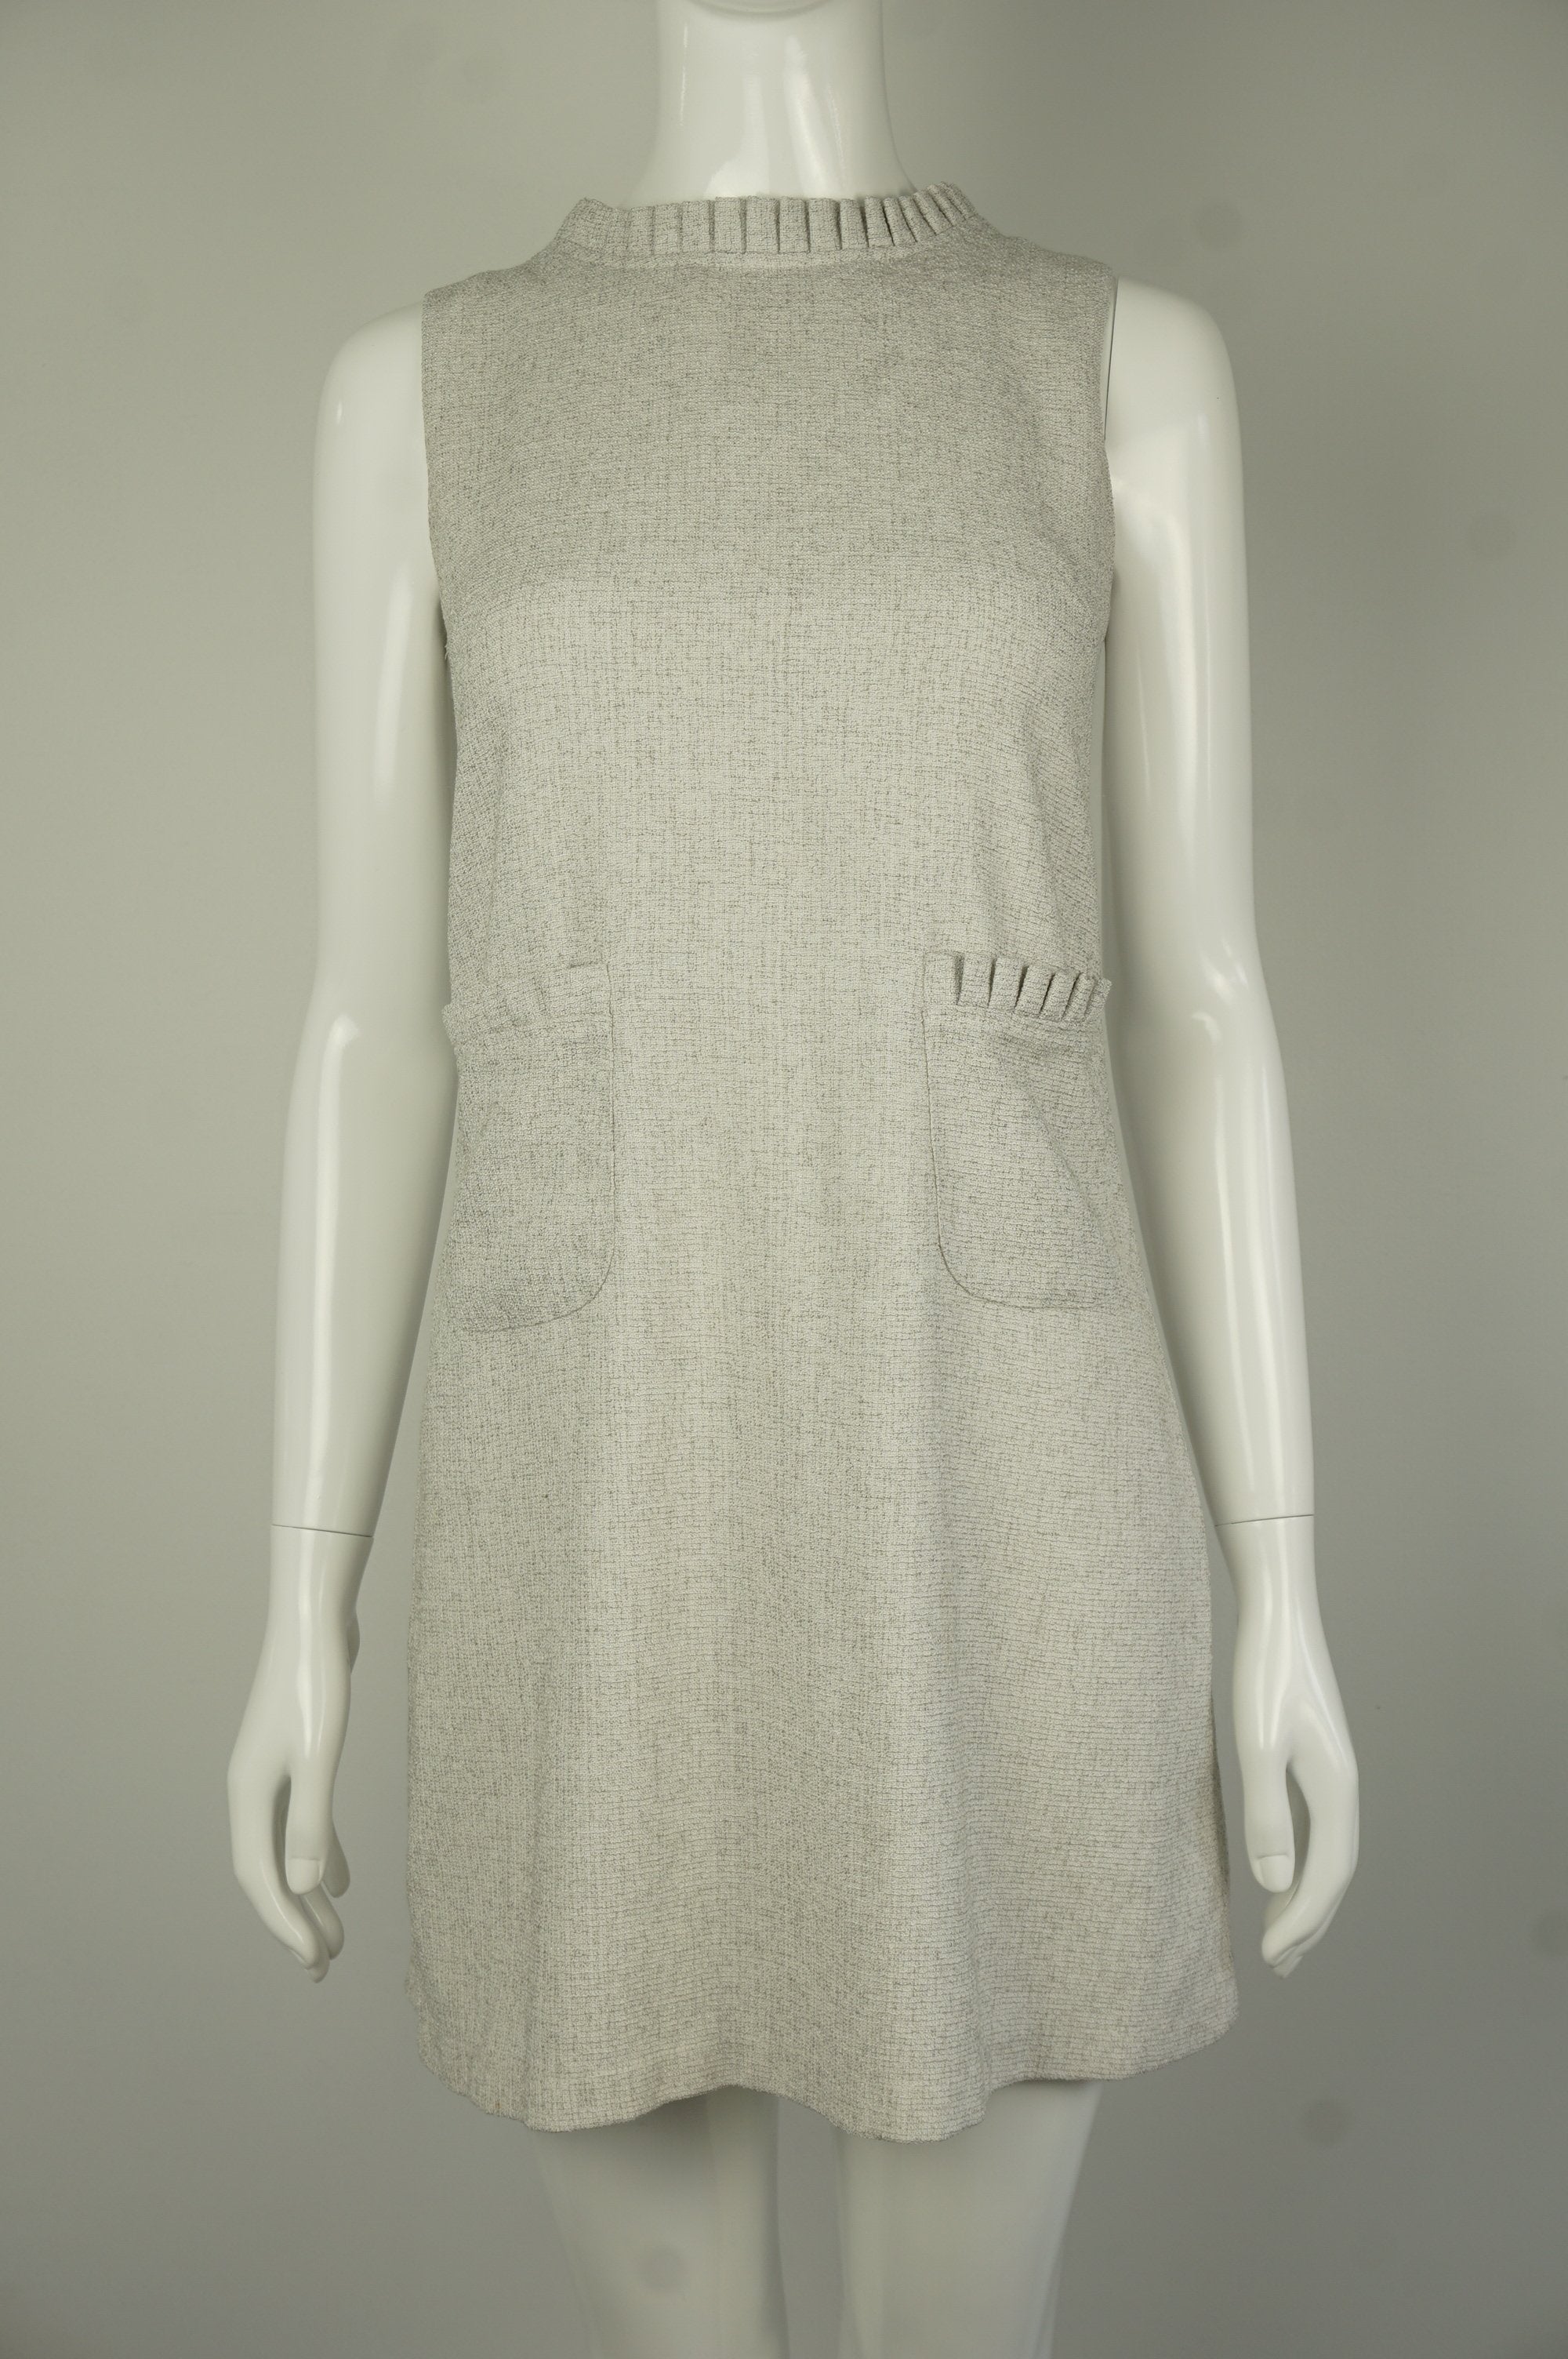 Elli Share Straight Cut Dress with Two Cute Side Pockets, Work life balance is not just about your hours. This Straight Cut Dress is perfect for both a chill, relaxed and a well-put-together look. , Grey, Drapy but soft fabric, women's Dresses & Rompers, women's Grey Dresses & Rompers, Elli Share women's Dresses & Rompers, Straight Cut Dress with two pockets, Relaxed Comfy Dress, Business Casual Women's Dress